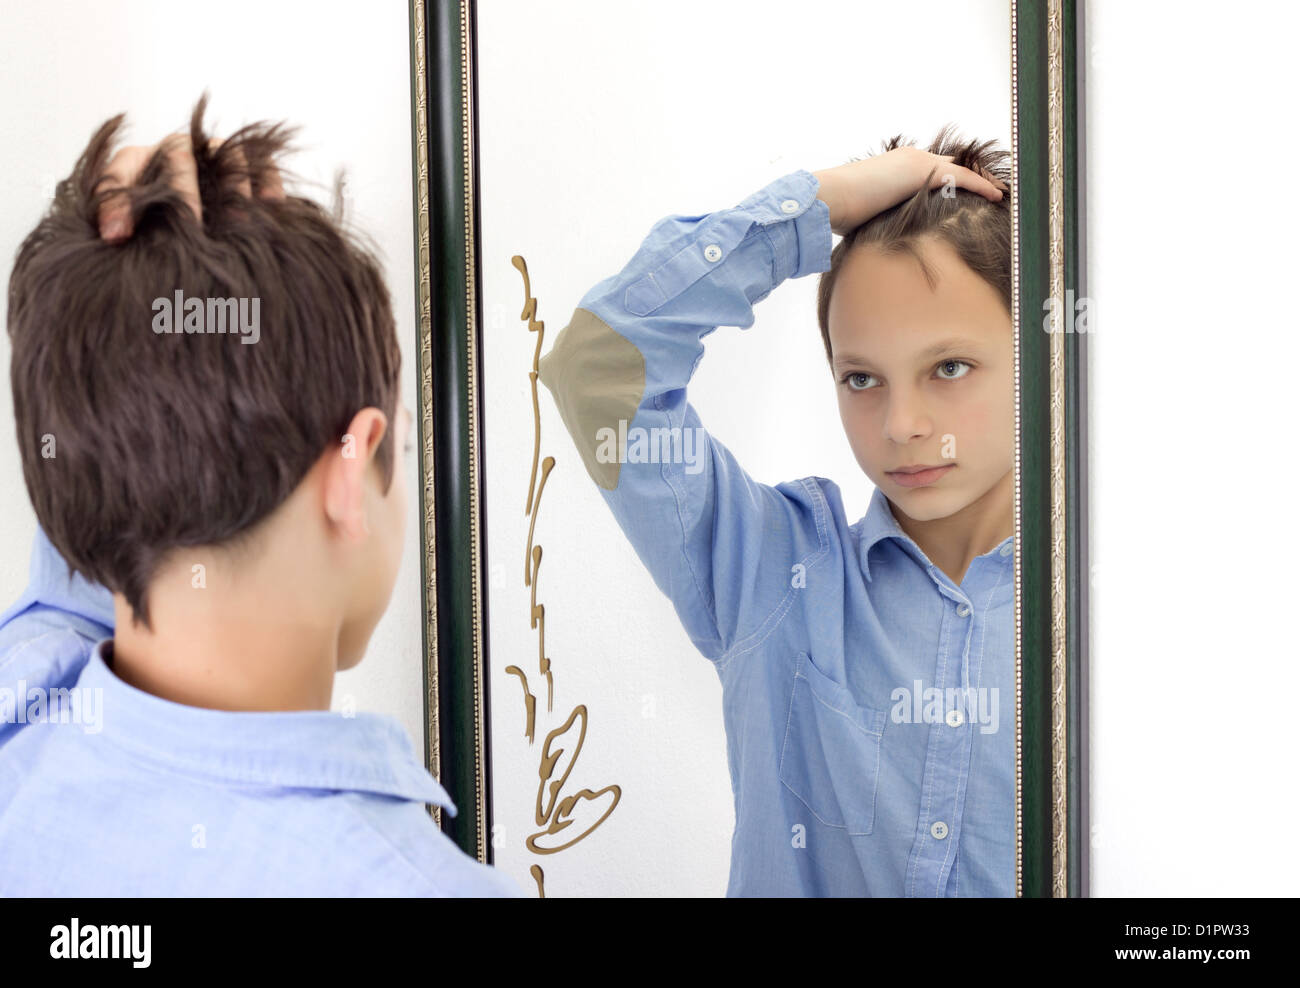 horizontal photograph of a young boy combing his hair while looking at himself in a mirror Stock Photo